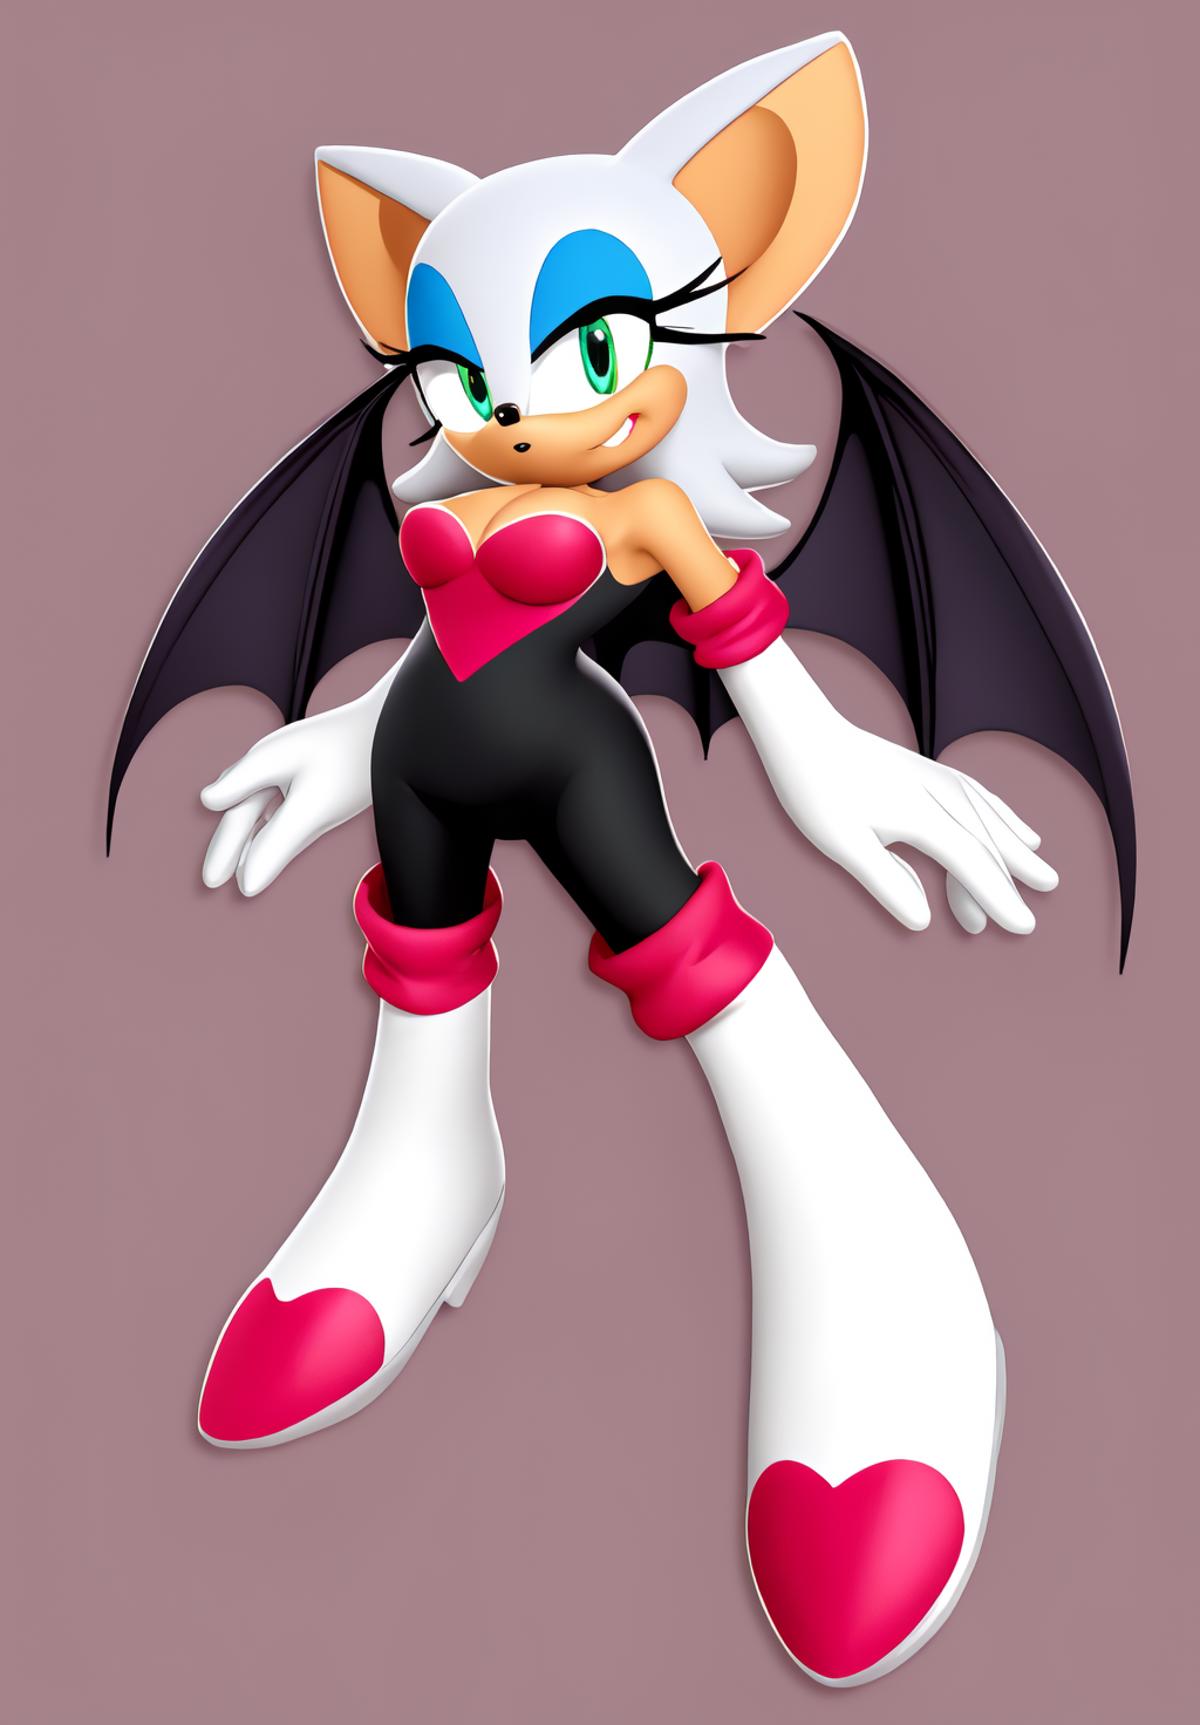 Rouge the Bat - Sonic the Hedgehog image by AsaTyr